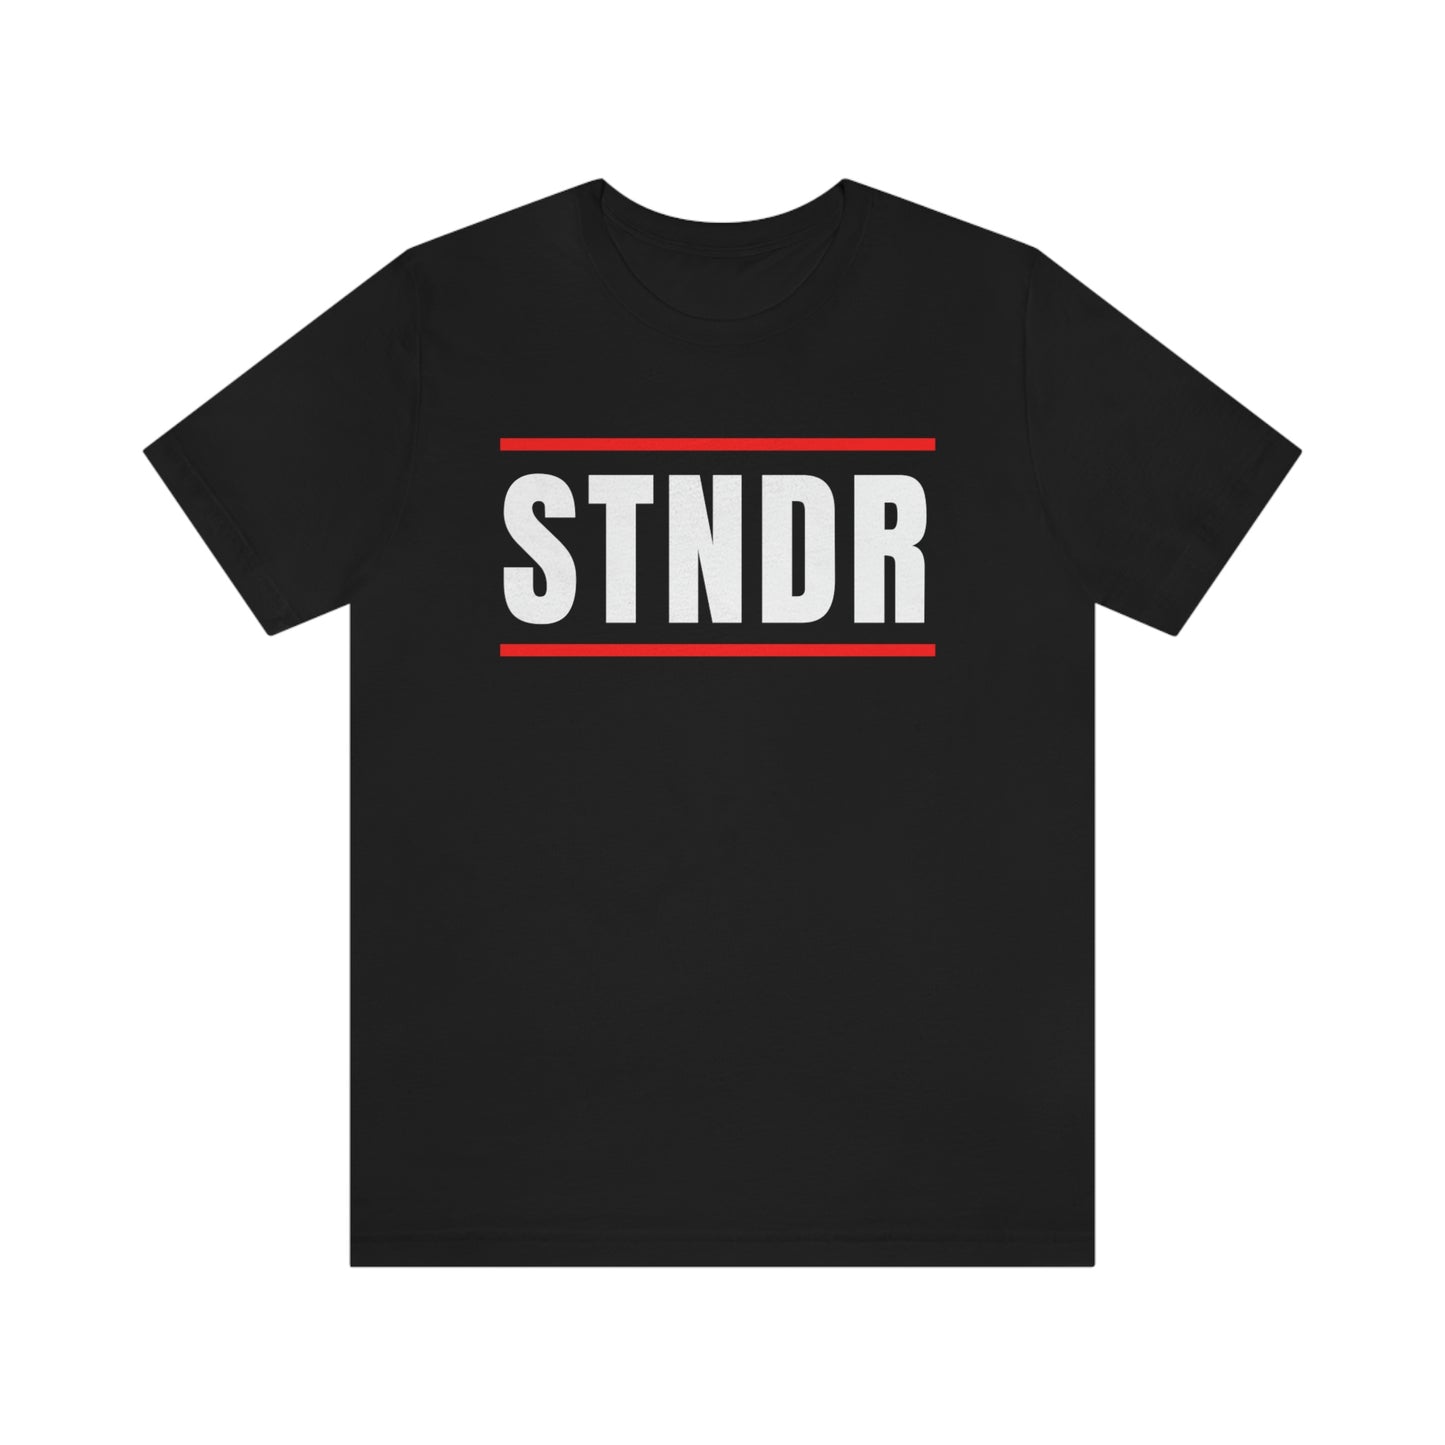 "STNDR" T-Shirt (White, Soft Cream, Olive & Heather Red Available)